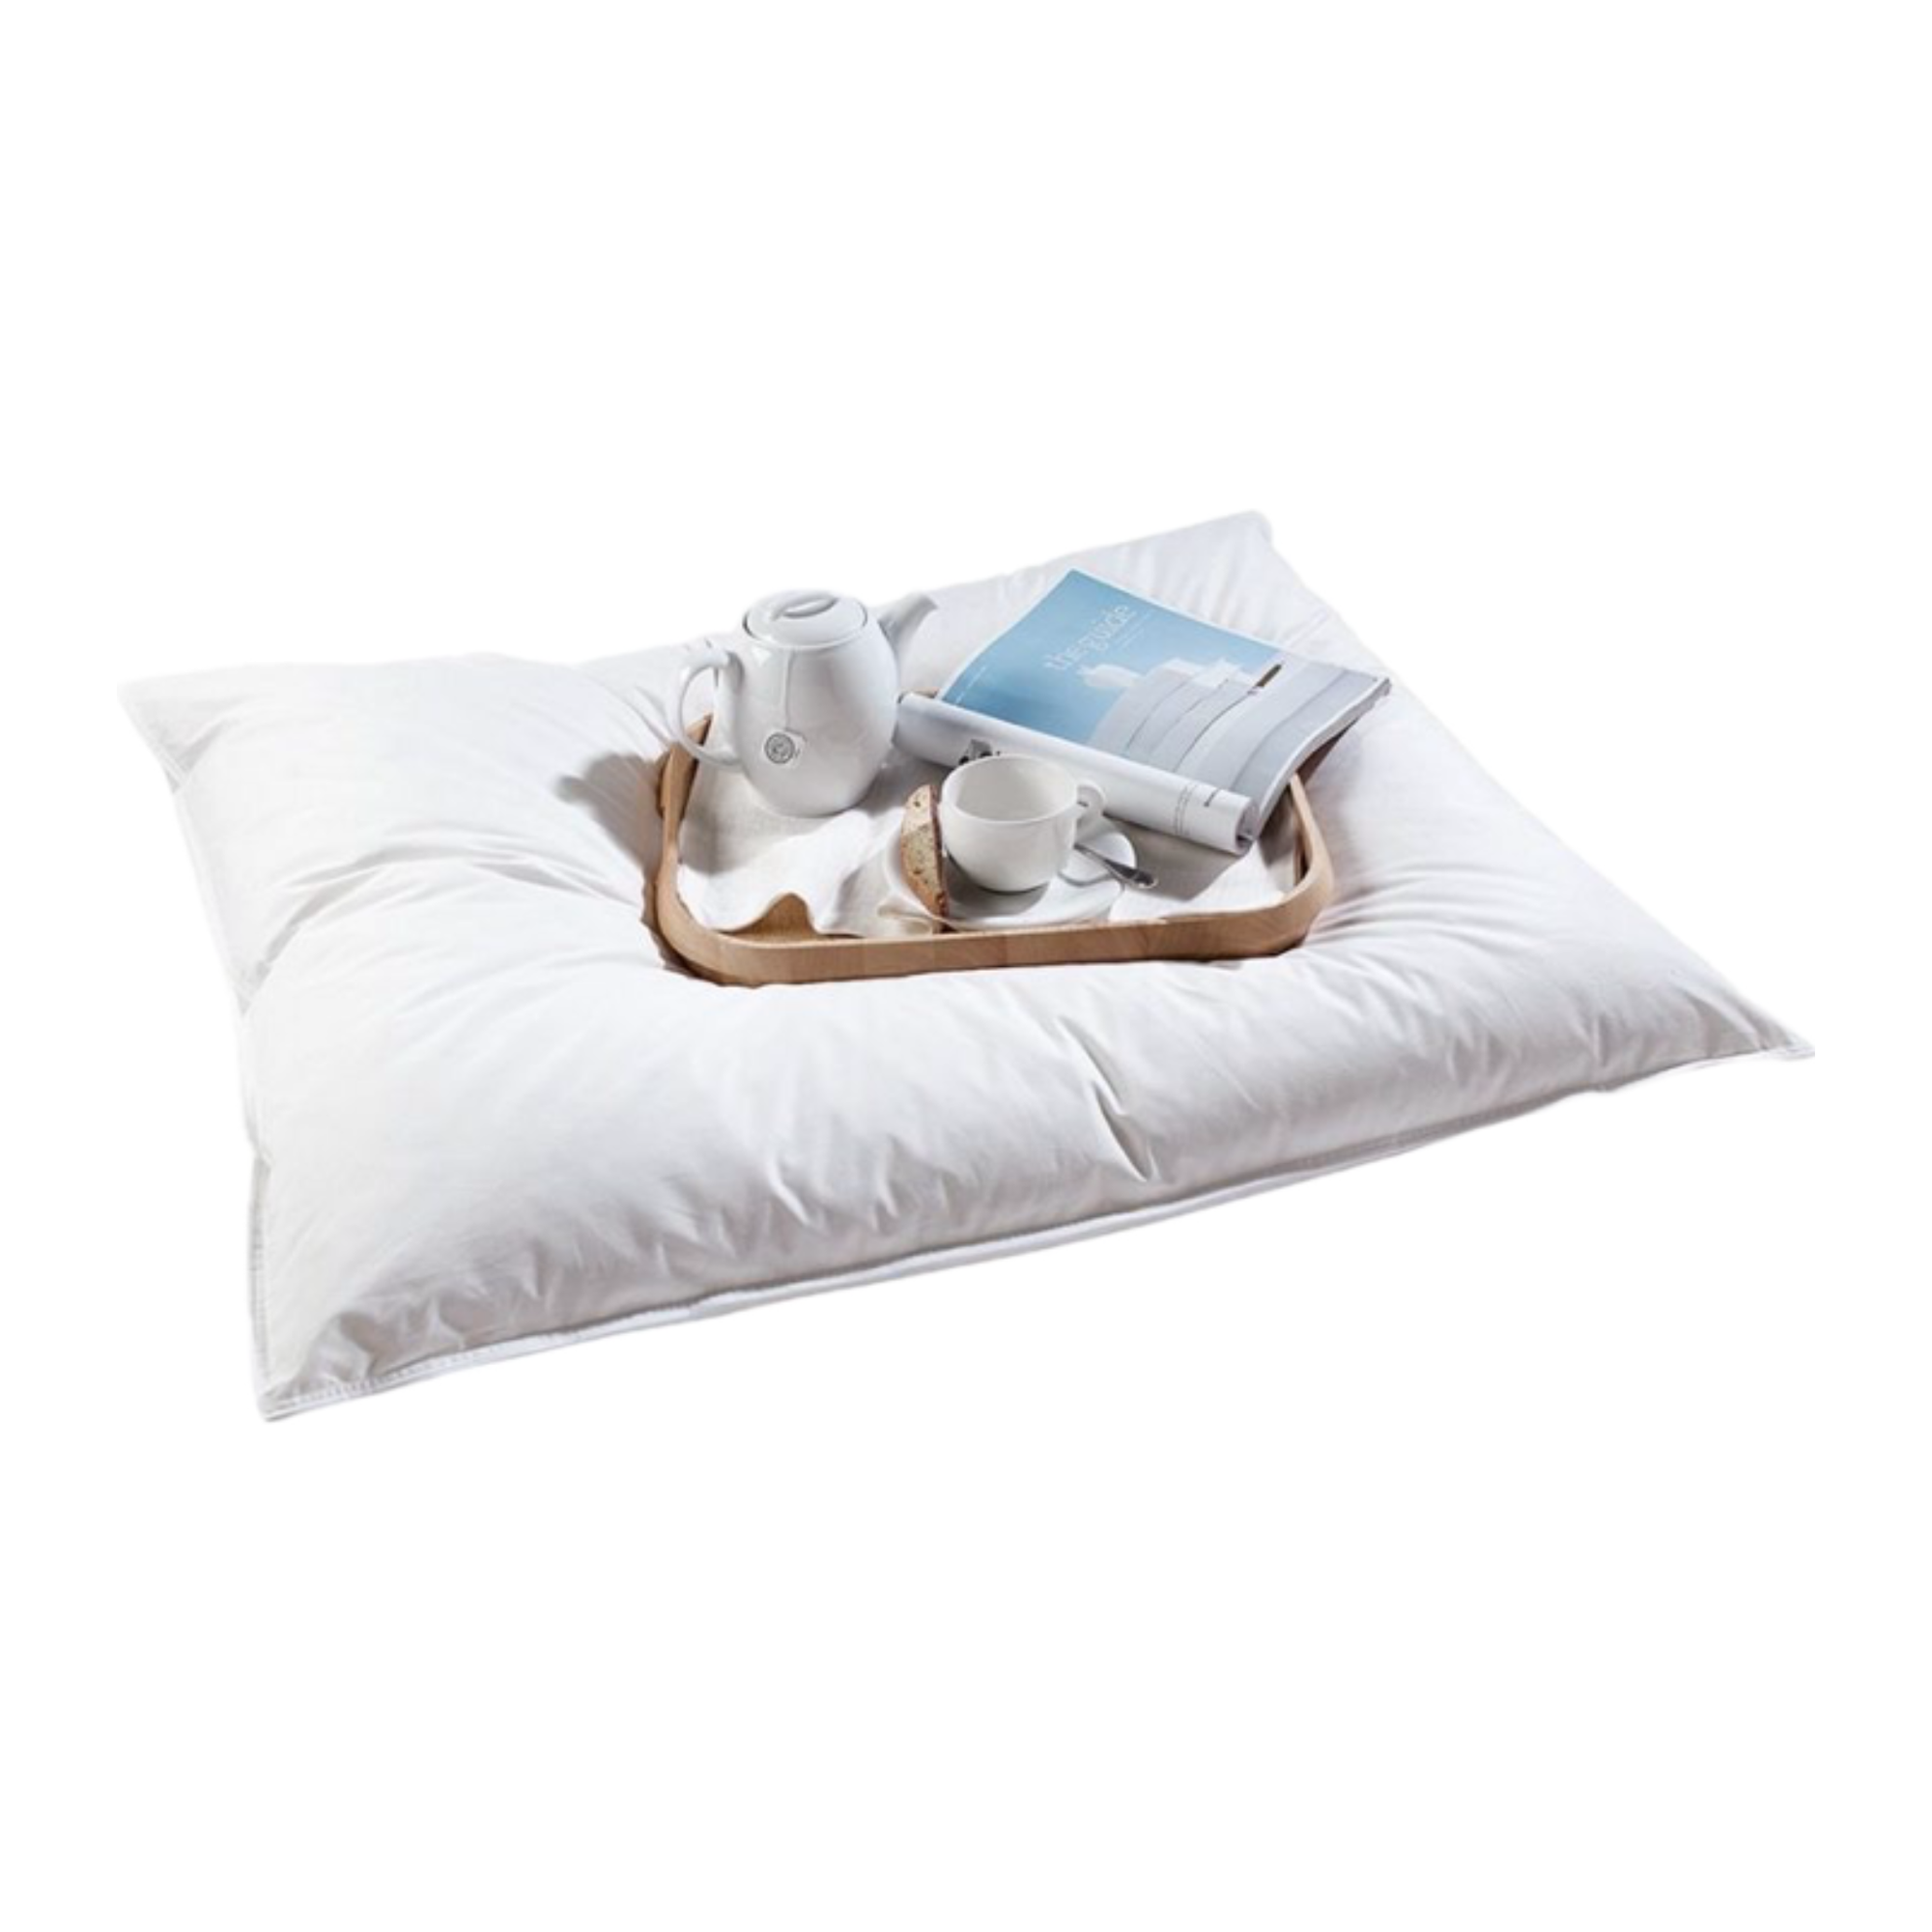 Breakfast Tray on Downtown Company Oversized Slumber Pillow Down Fill